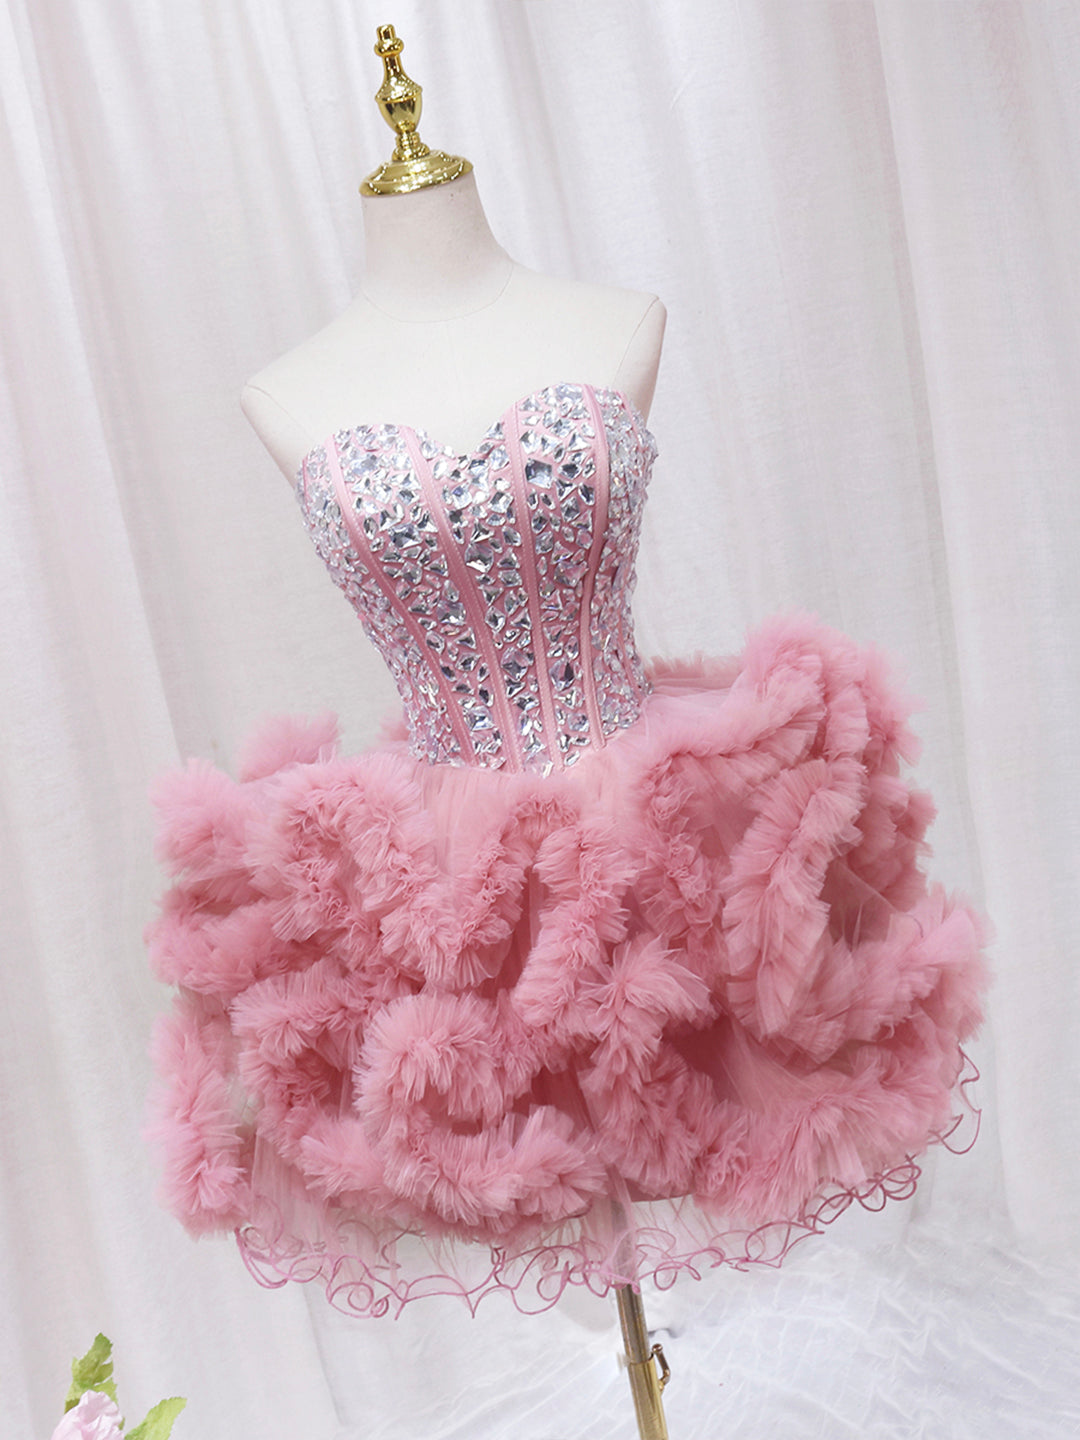 Pink Sweetheart Neckline Tulle Short Prom Dress with Rhinestones, Cute Party Dress